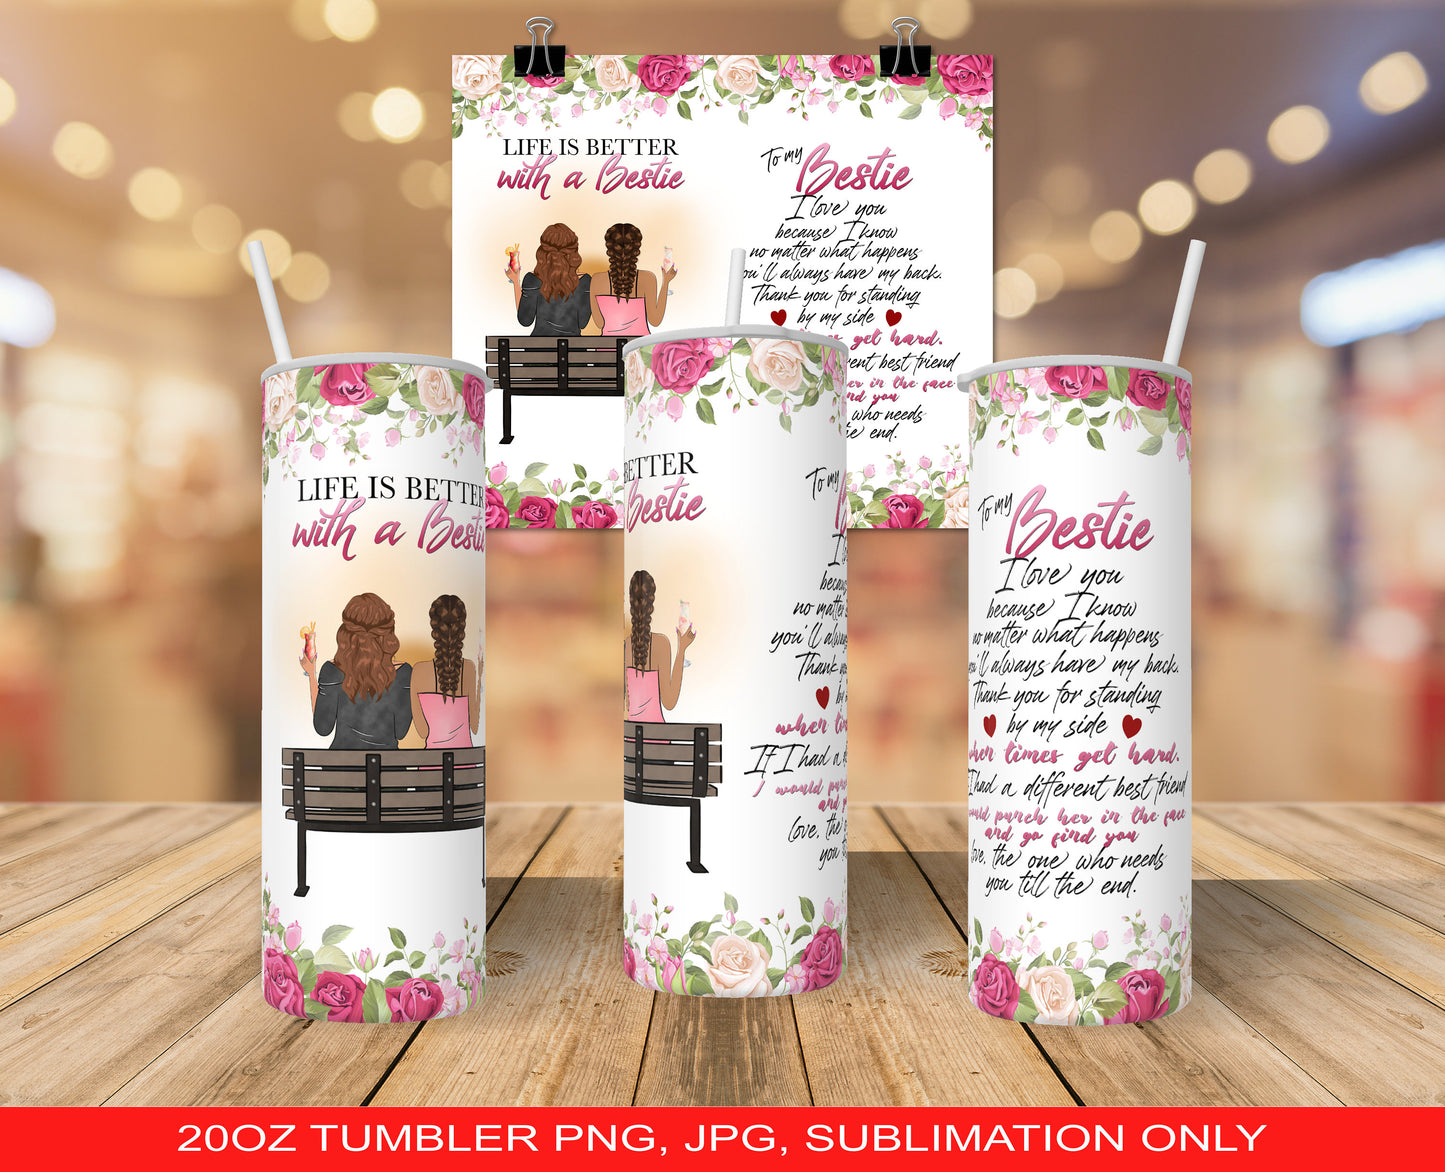 Life Is Better With A Bestie 20oz Tumbler PNG and JPG ONLY